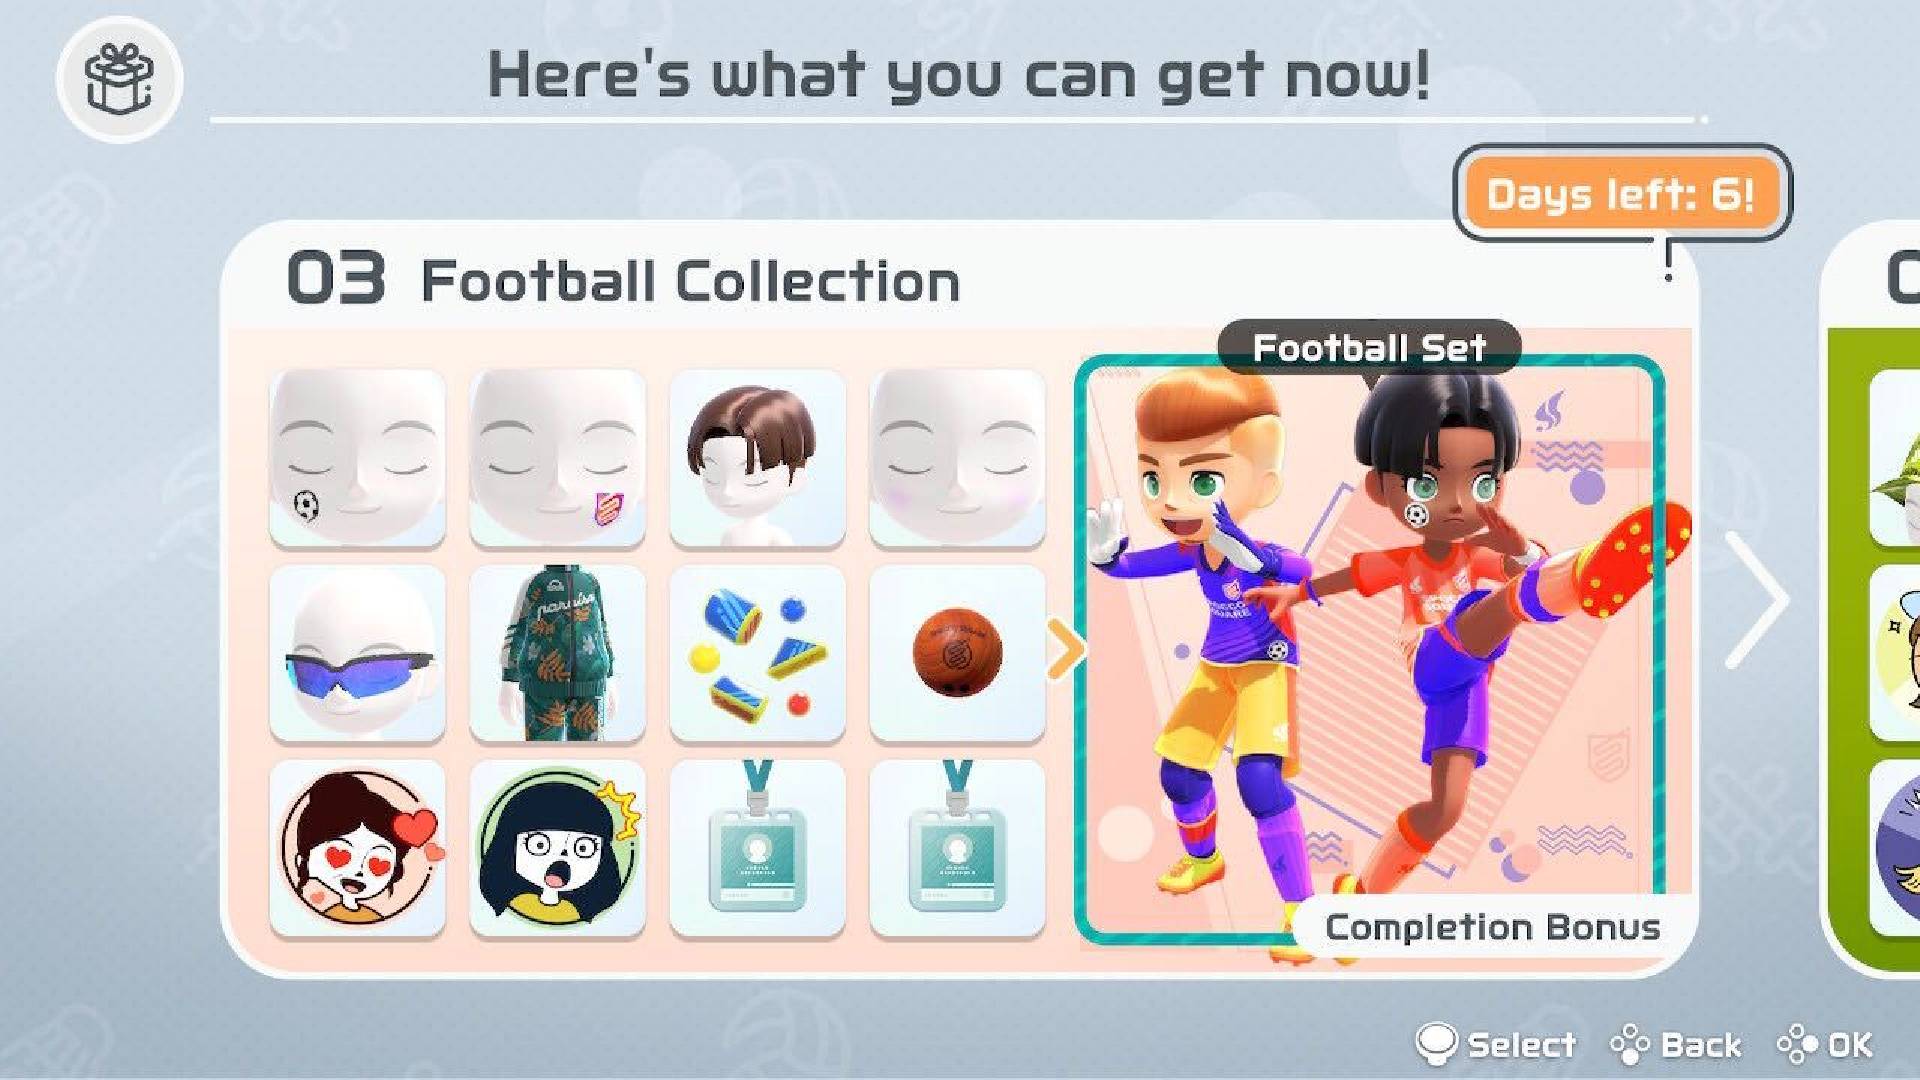 Nintendo switch sports cosmetics: different outfits are visible for Nintendo Switch Sports player characters